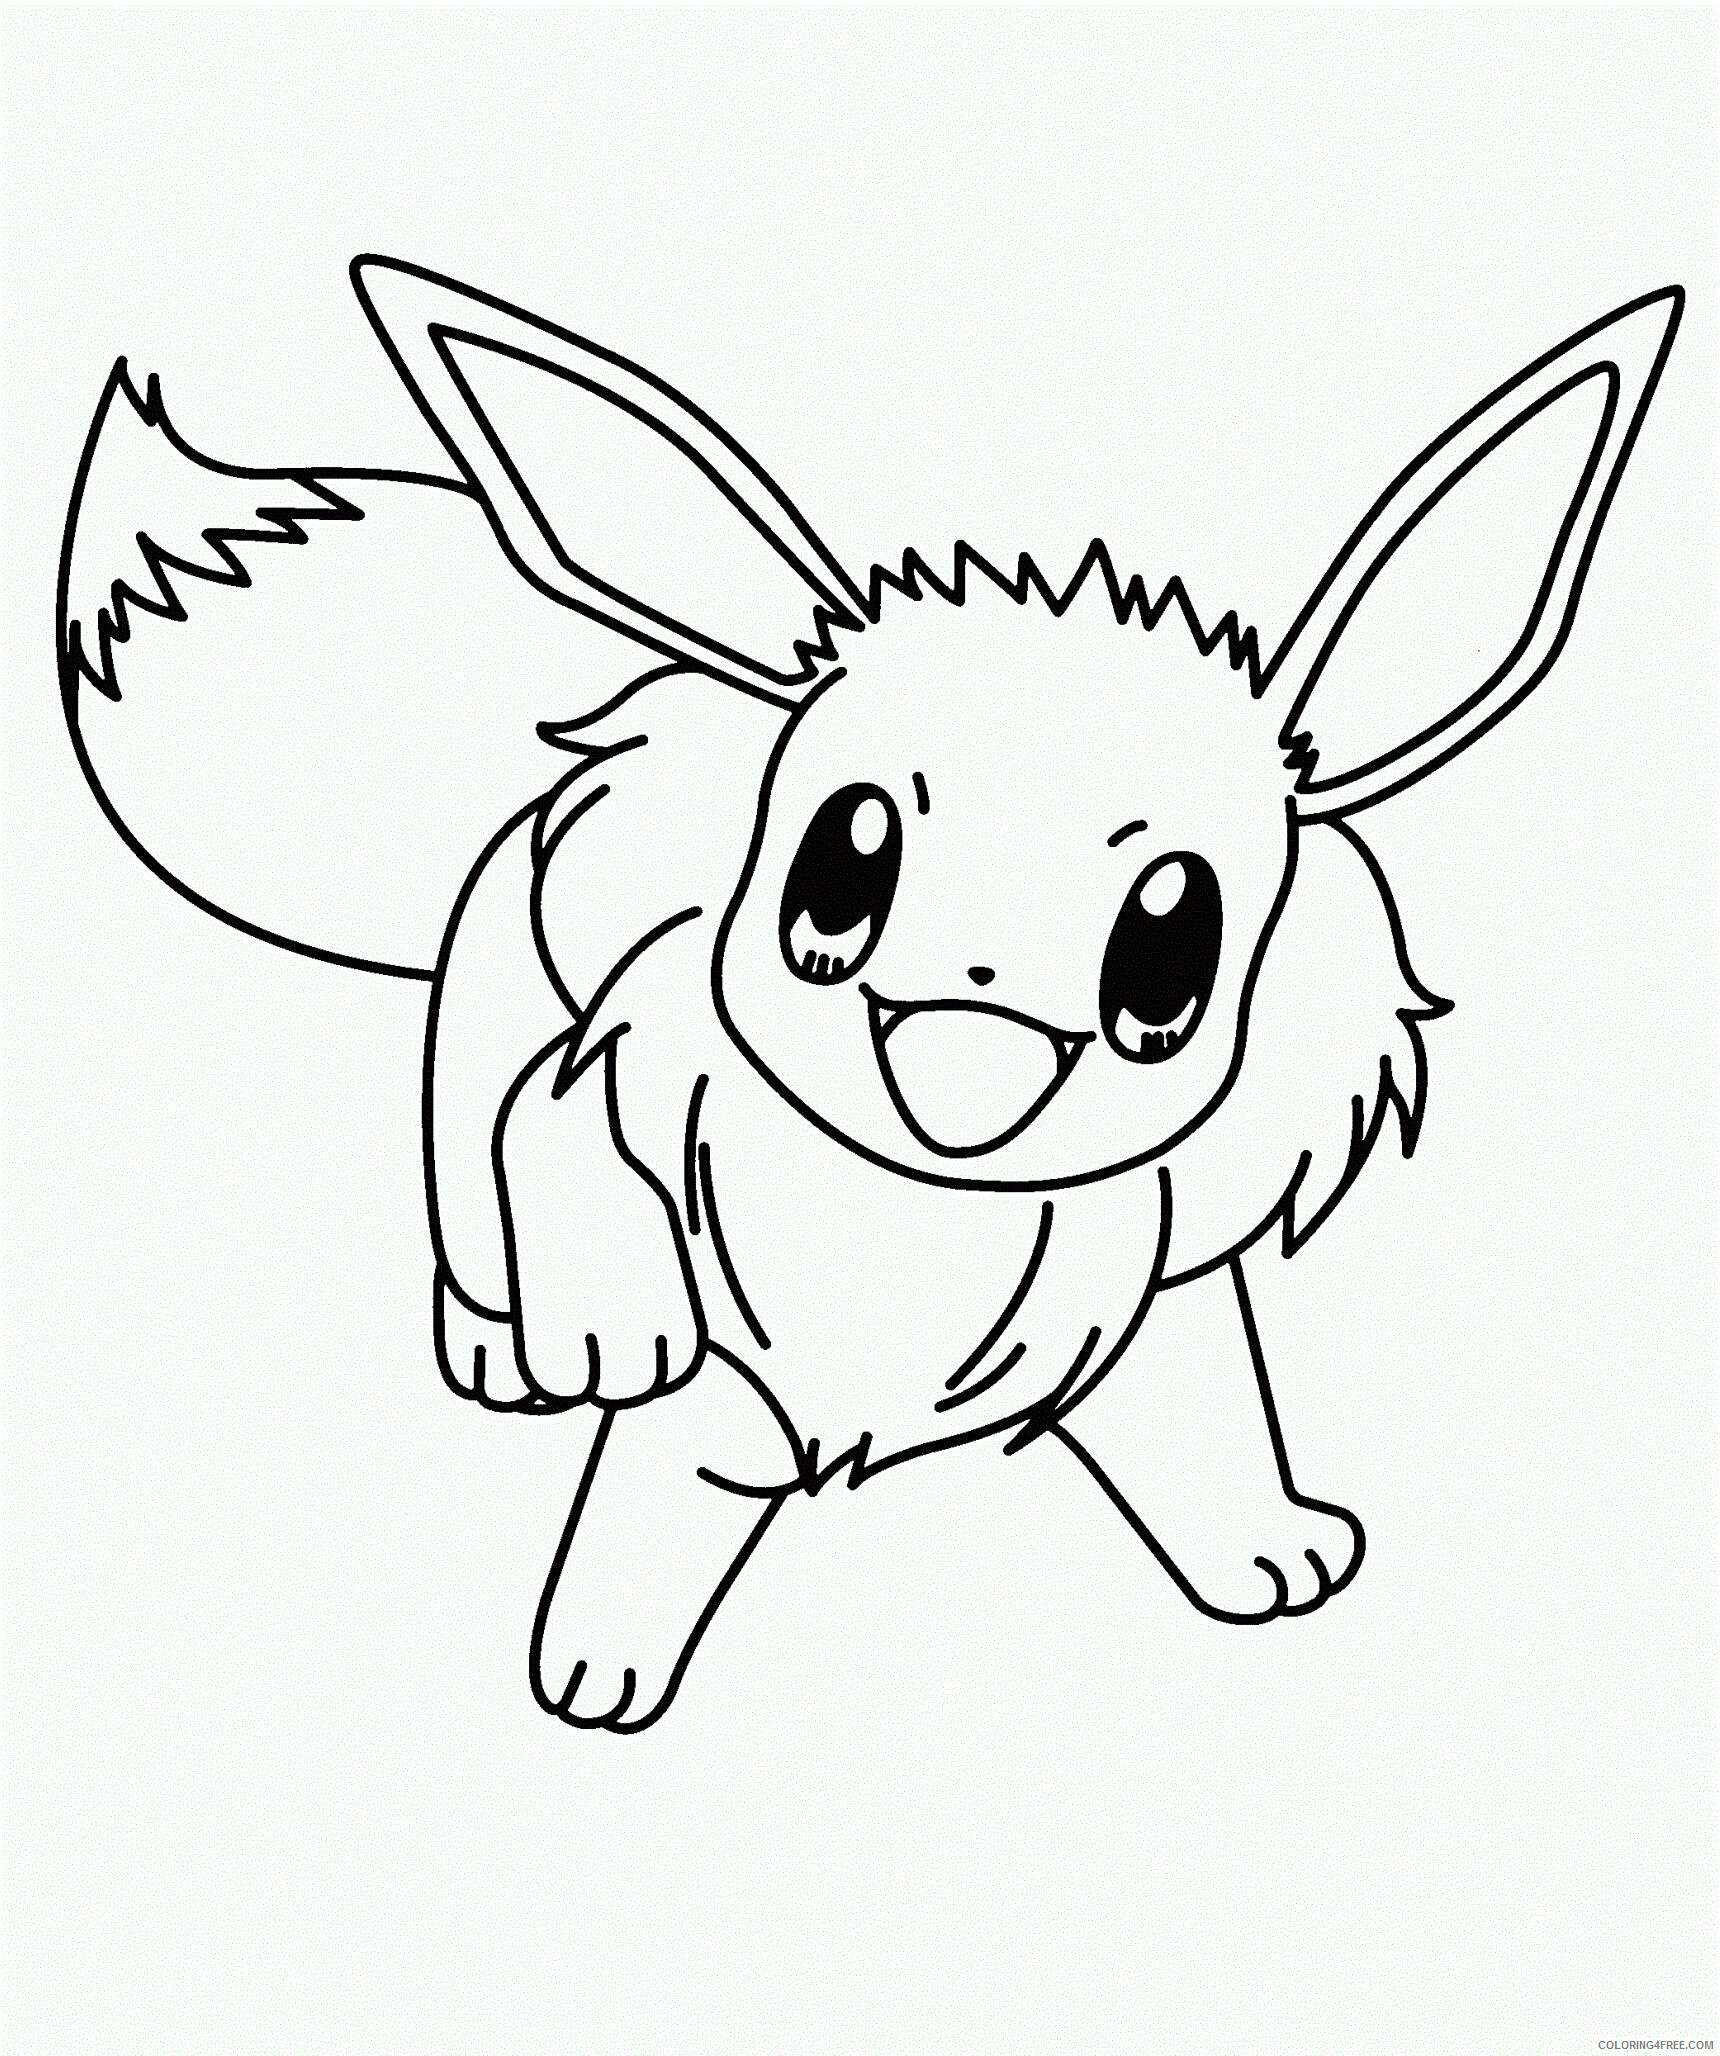 Eevee Pokemon Characters Printable Coloring Pages eevee to download and print for free photo ideas 2021 034 Coloring4free